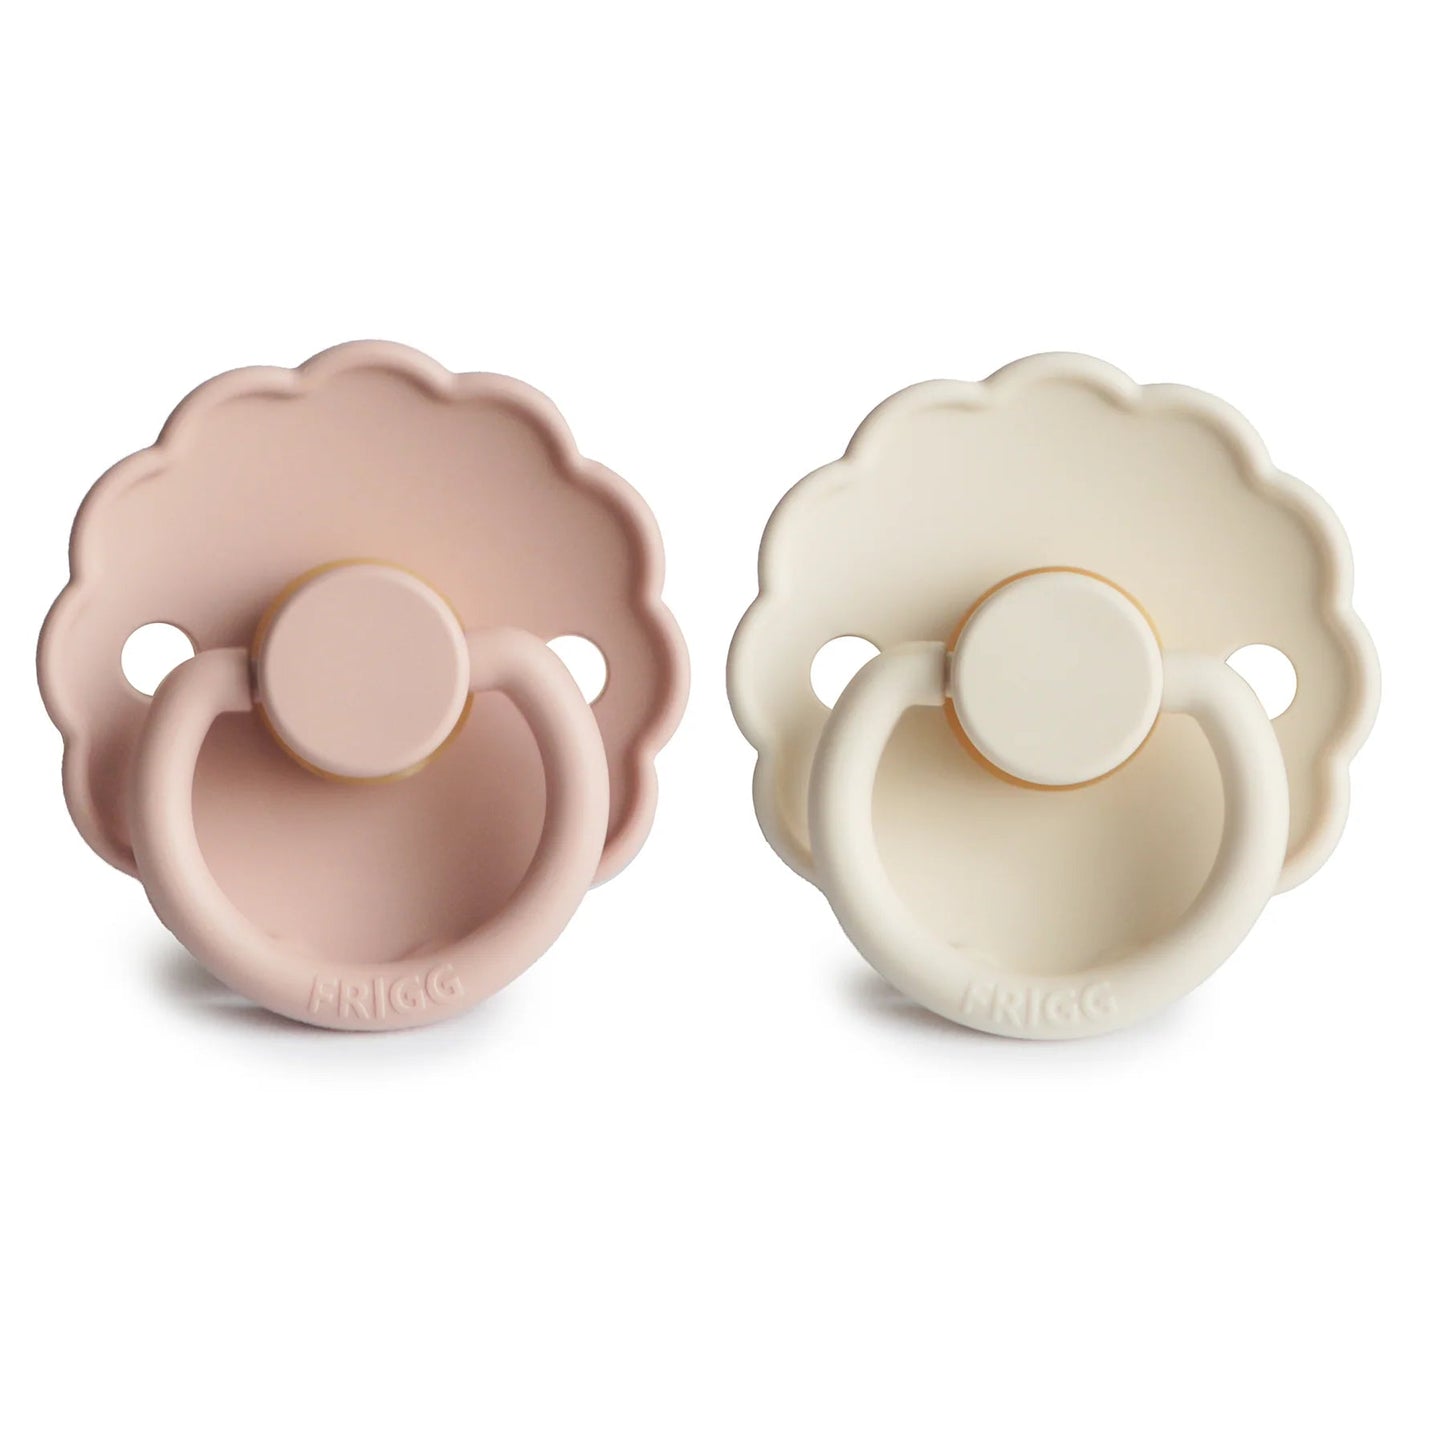 Blush/Cream Daisy Rubber Pacifier Set of 2 180 BABY GEAR Mushie 